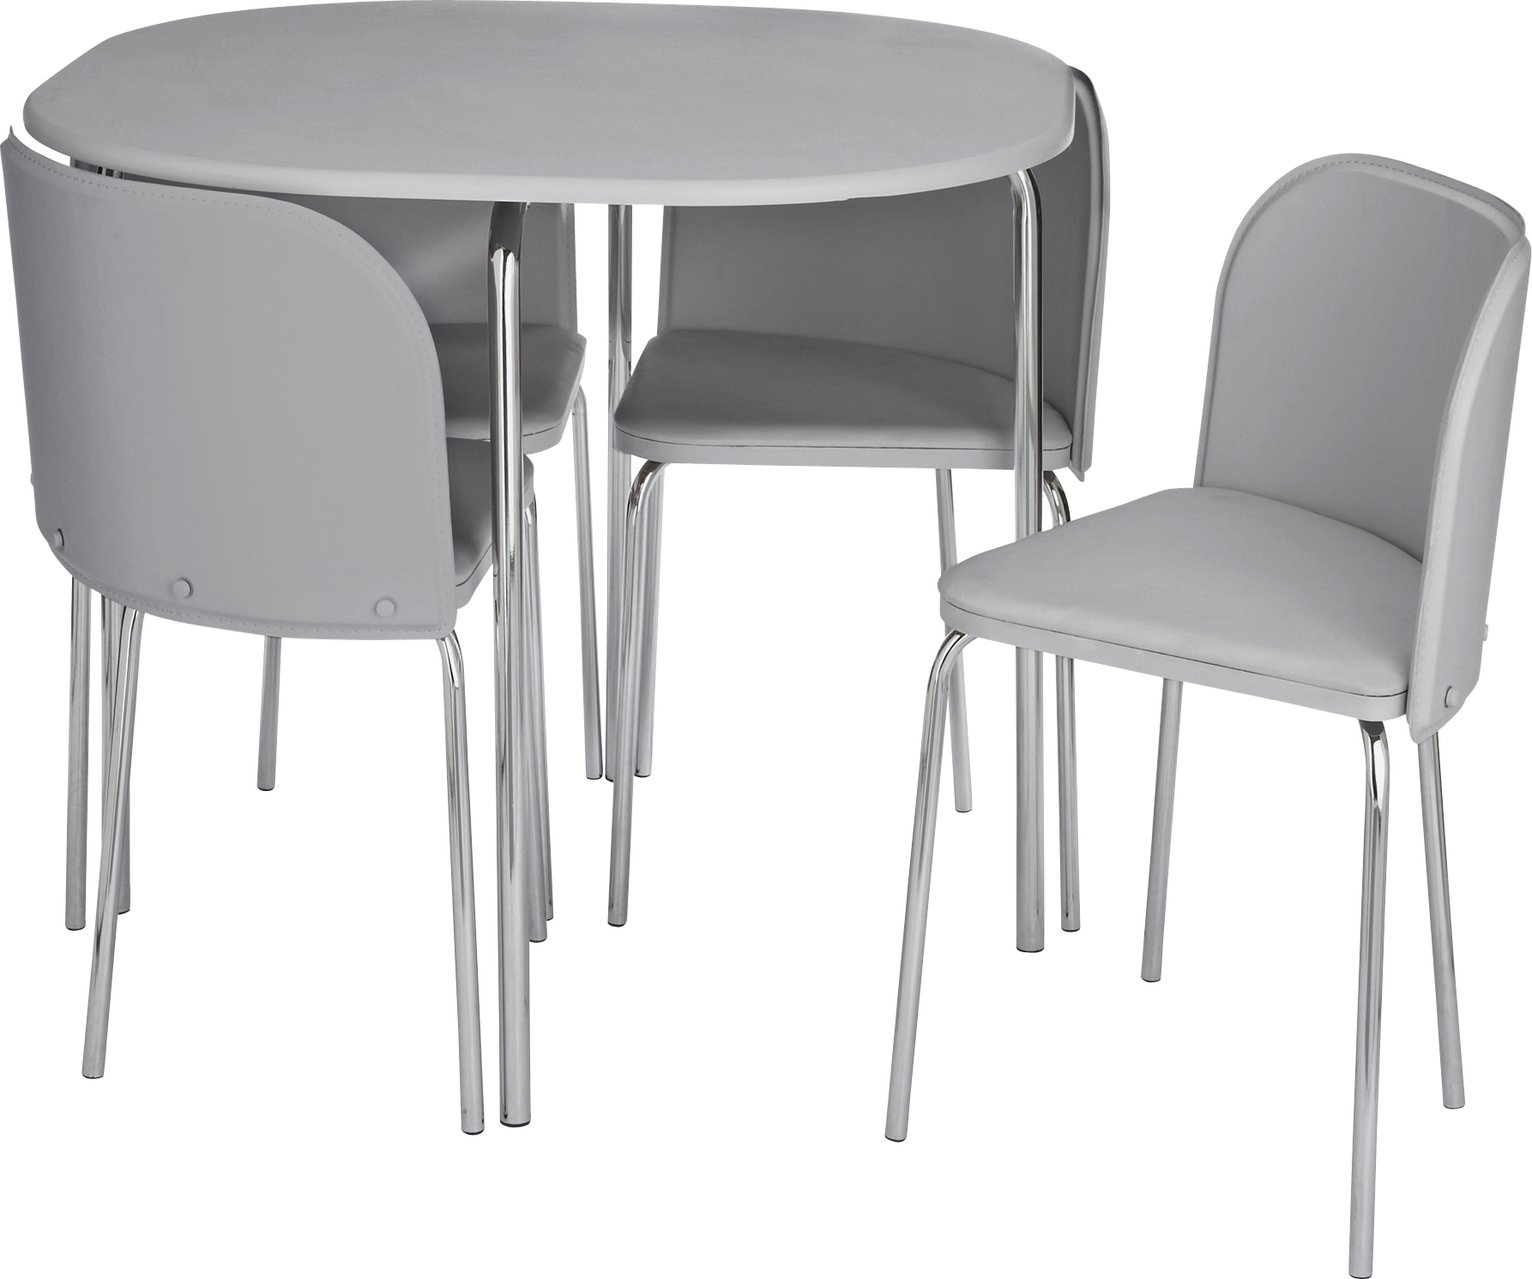 Argos Home Amparo Space Saving Dining Table & 4 Chairs -Grey (6215136